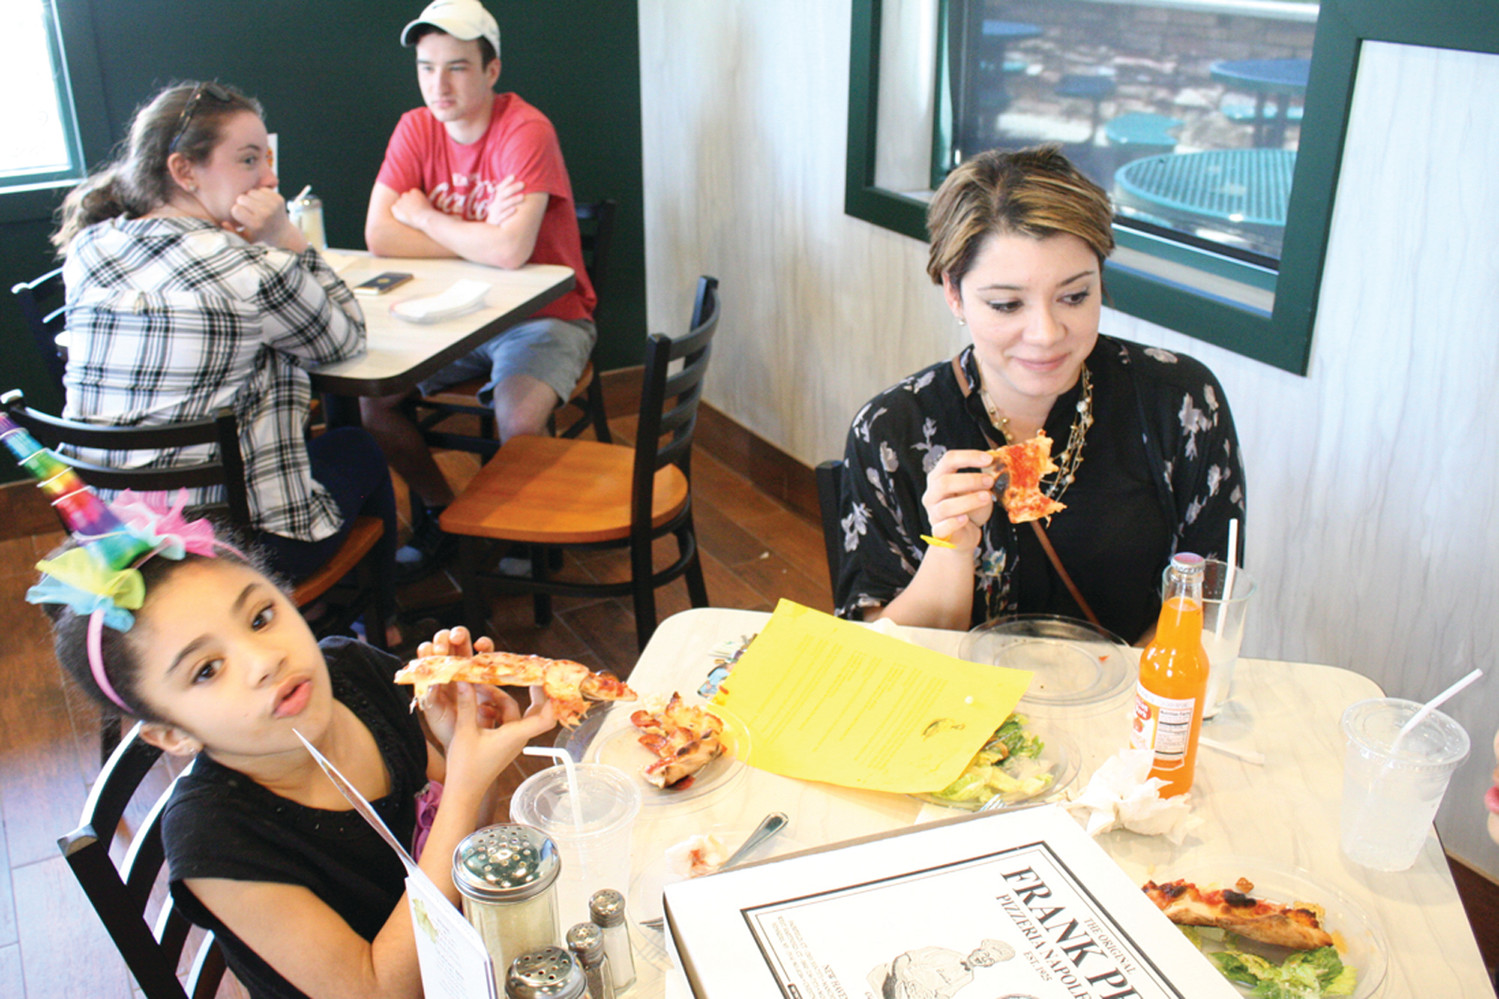 PIZZA OVER SCHOOL: Jennifer Valley brought her daughter, Lyric De Jesus, and son, Jonathan De Jesus, to the free pizza day Friday afternoon at Frank Pepe’s, saying it was tough to pass up the tasty deal. The family lives in Warwick.